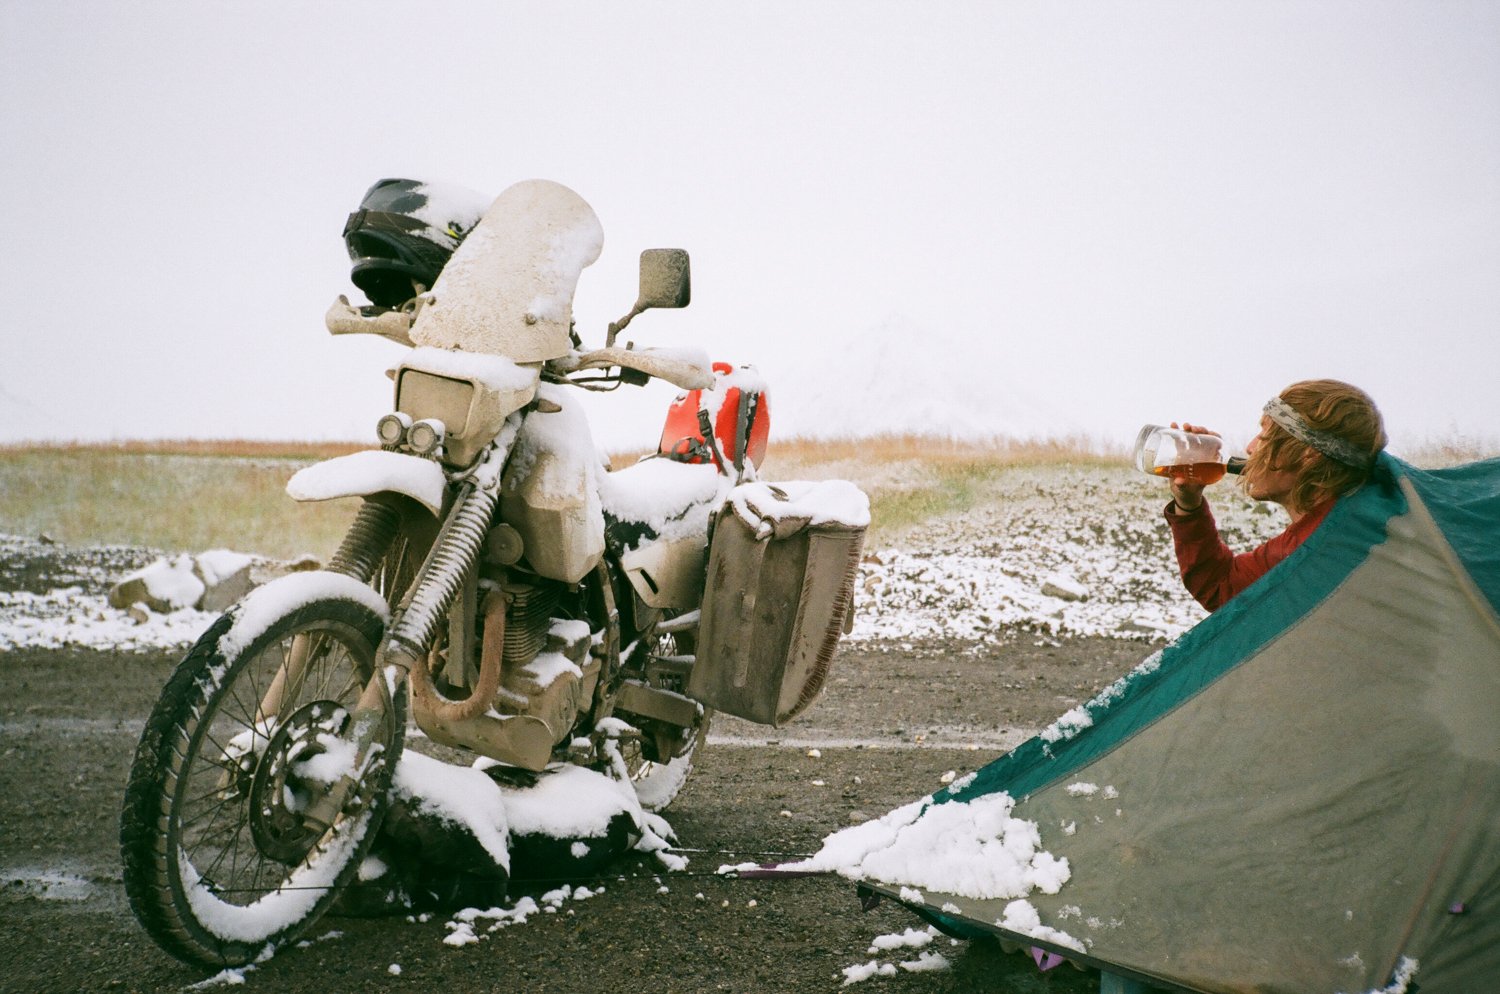  Motorcycle, rider and tent set up in a snowy camping site. 